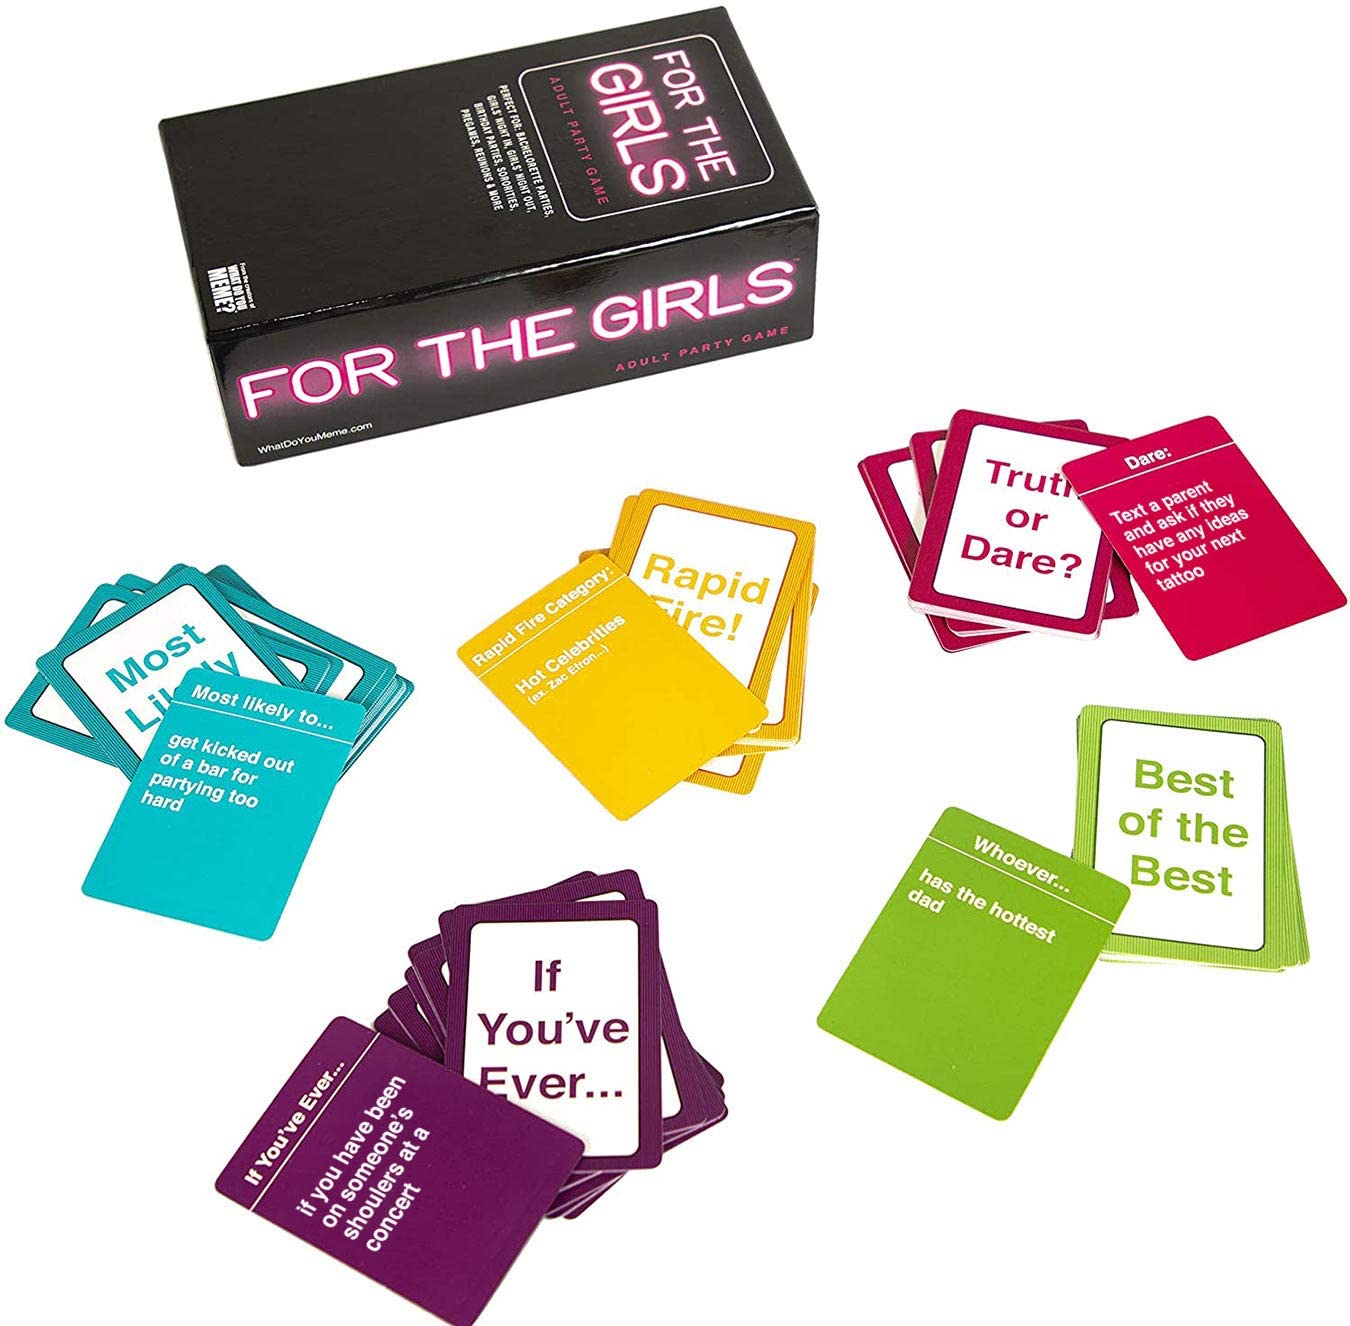  WHAT DO YOU MEME? for The Girls - The Ultimate Girls Night  Party Game : Toys & Games